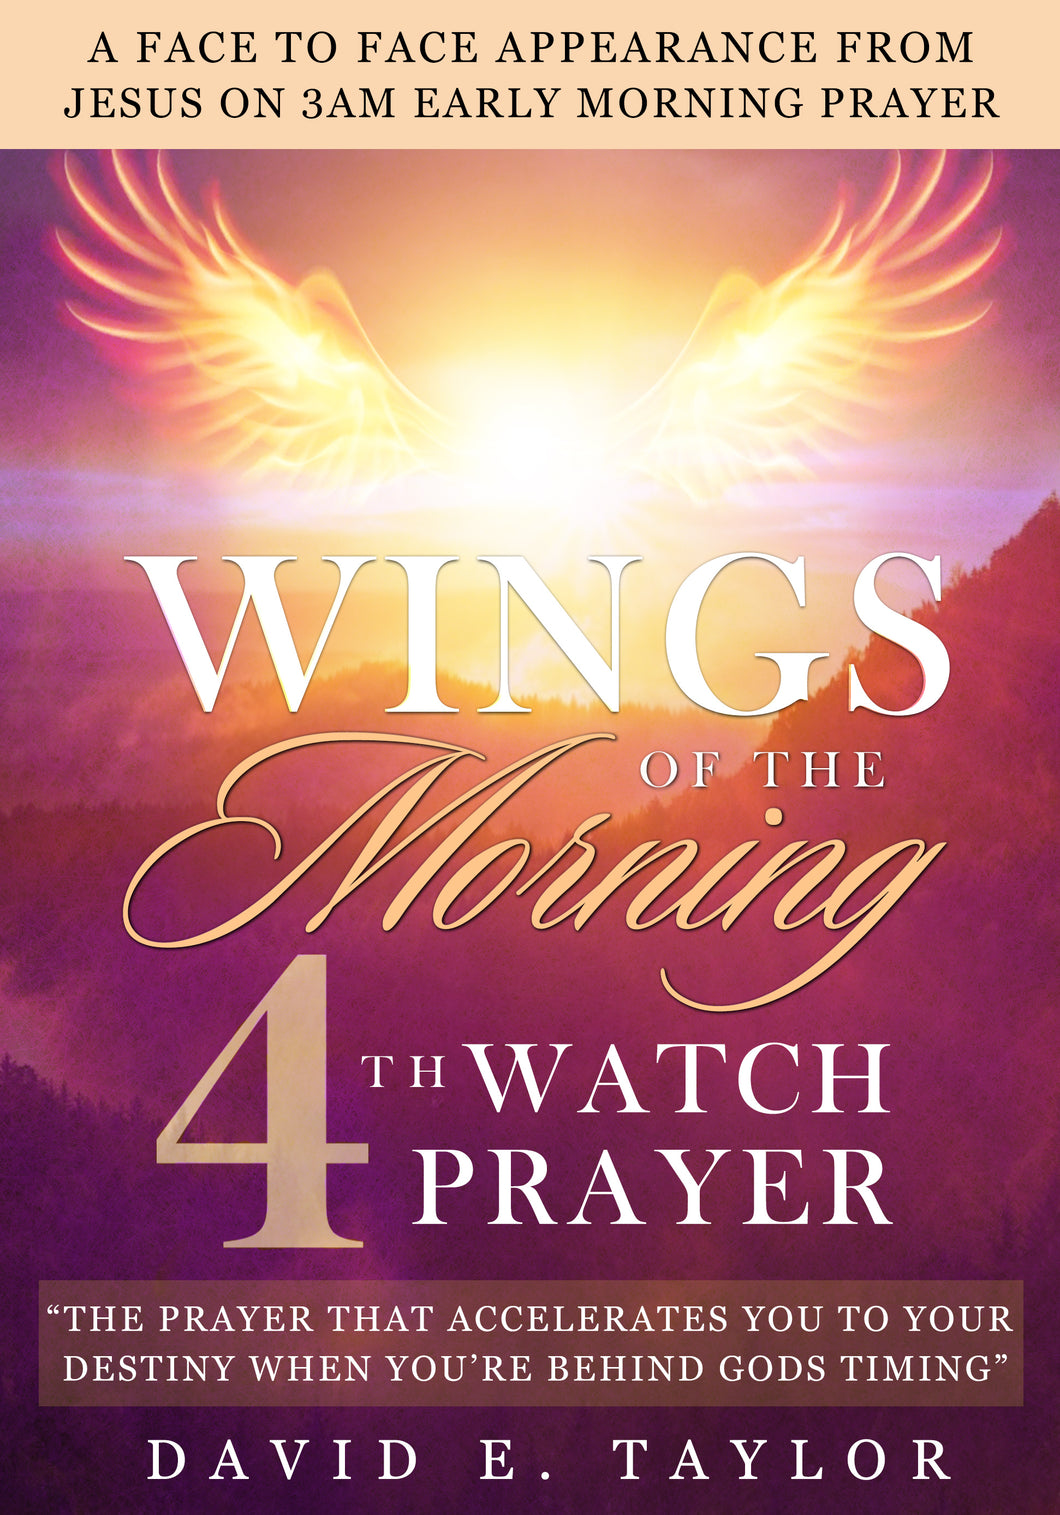 Wings of the Morning: Fourth Watch Prayer E-book